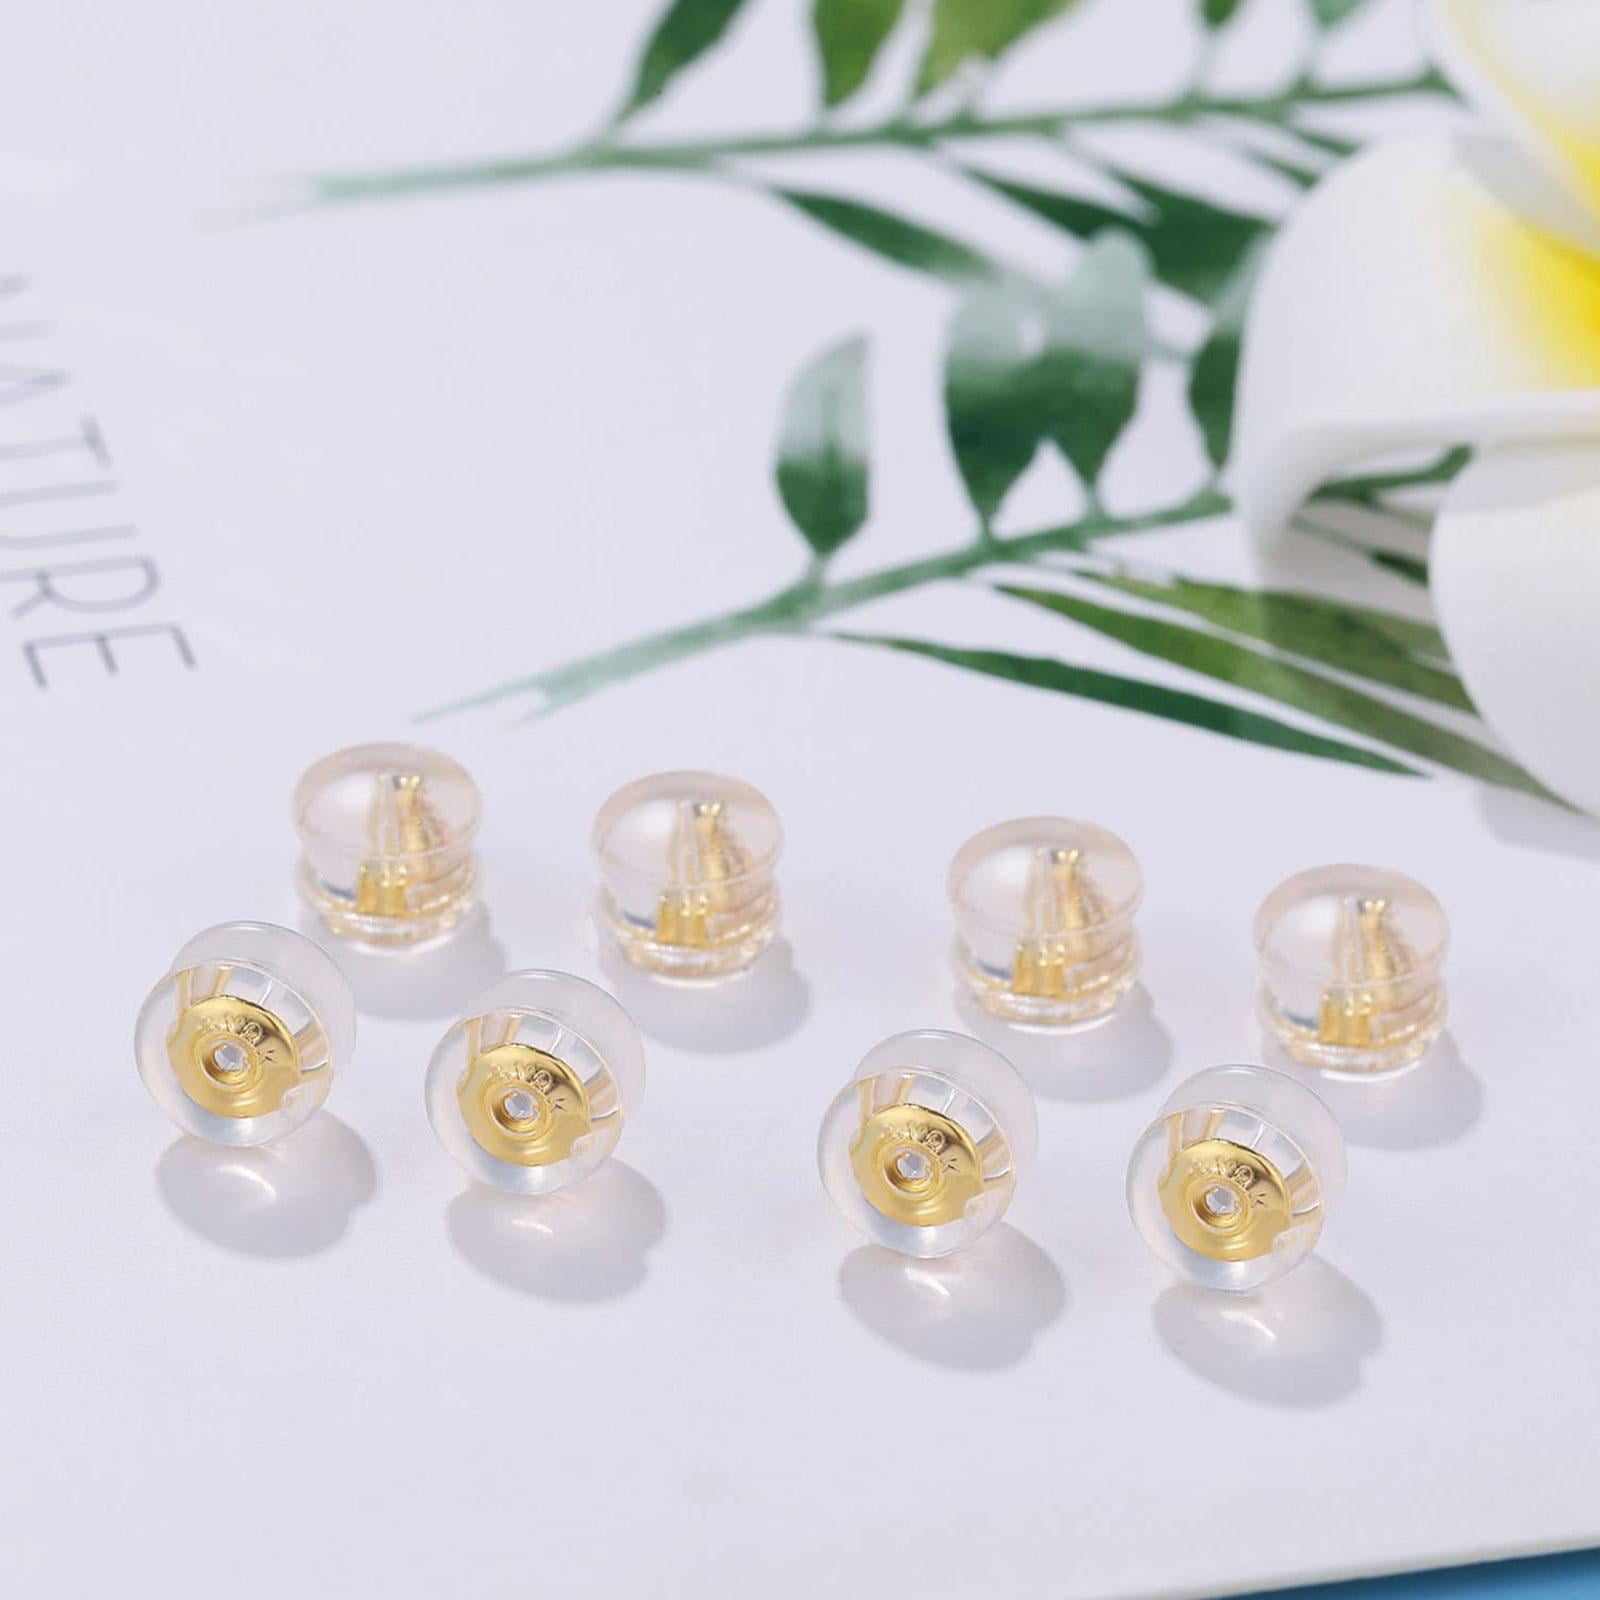 24 Pcs Silicone Earring Backs for Studs 18k Gold Pierced Earring Backs for  Posts Replacements Secure Lock Backs Droopy Ears Anti Sensitive Soft Clear Earring  Backs for Adults Kids Girls - Yahoo Shopping